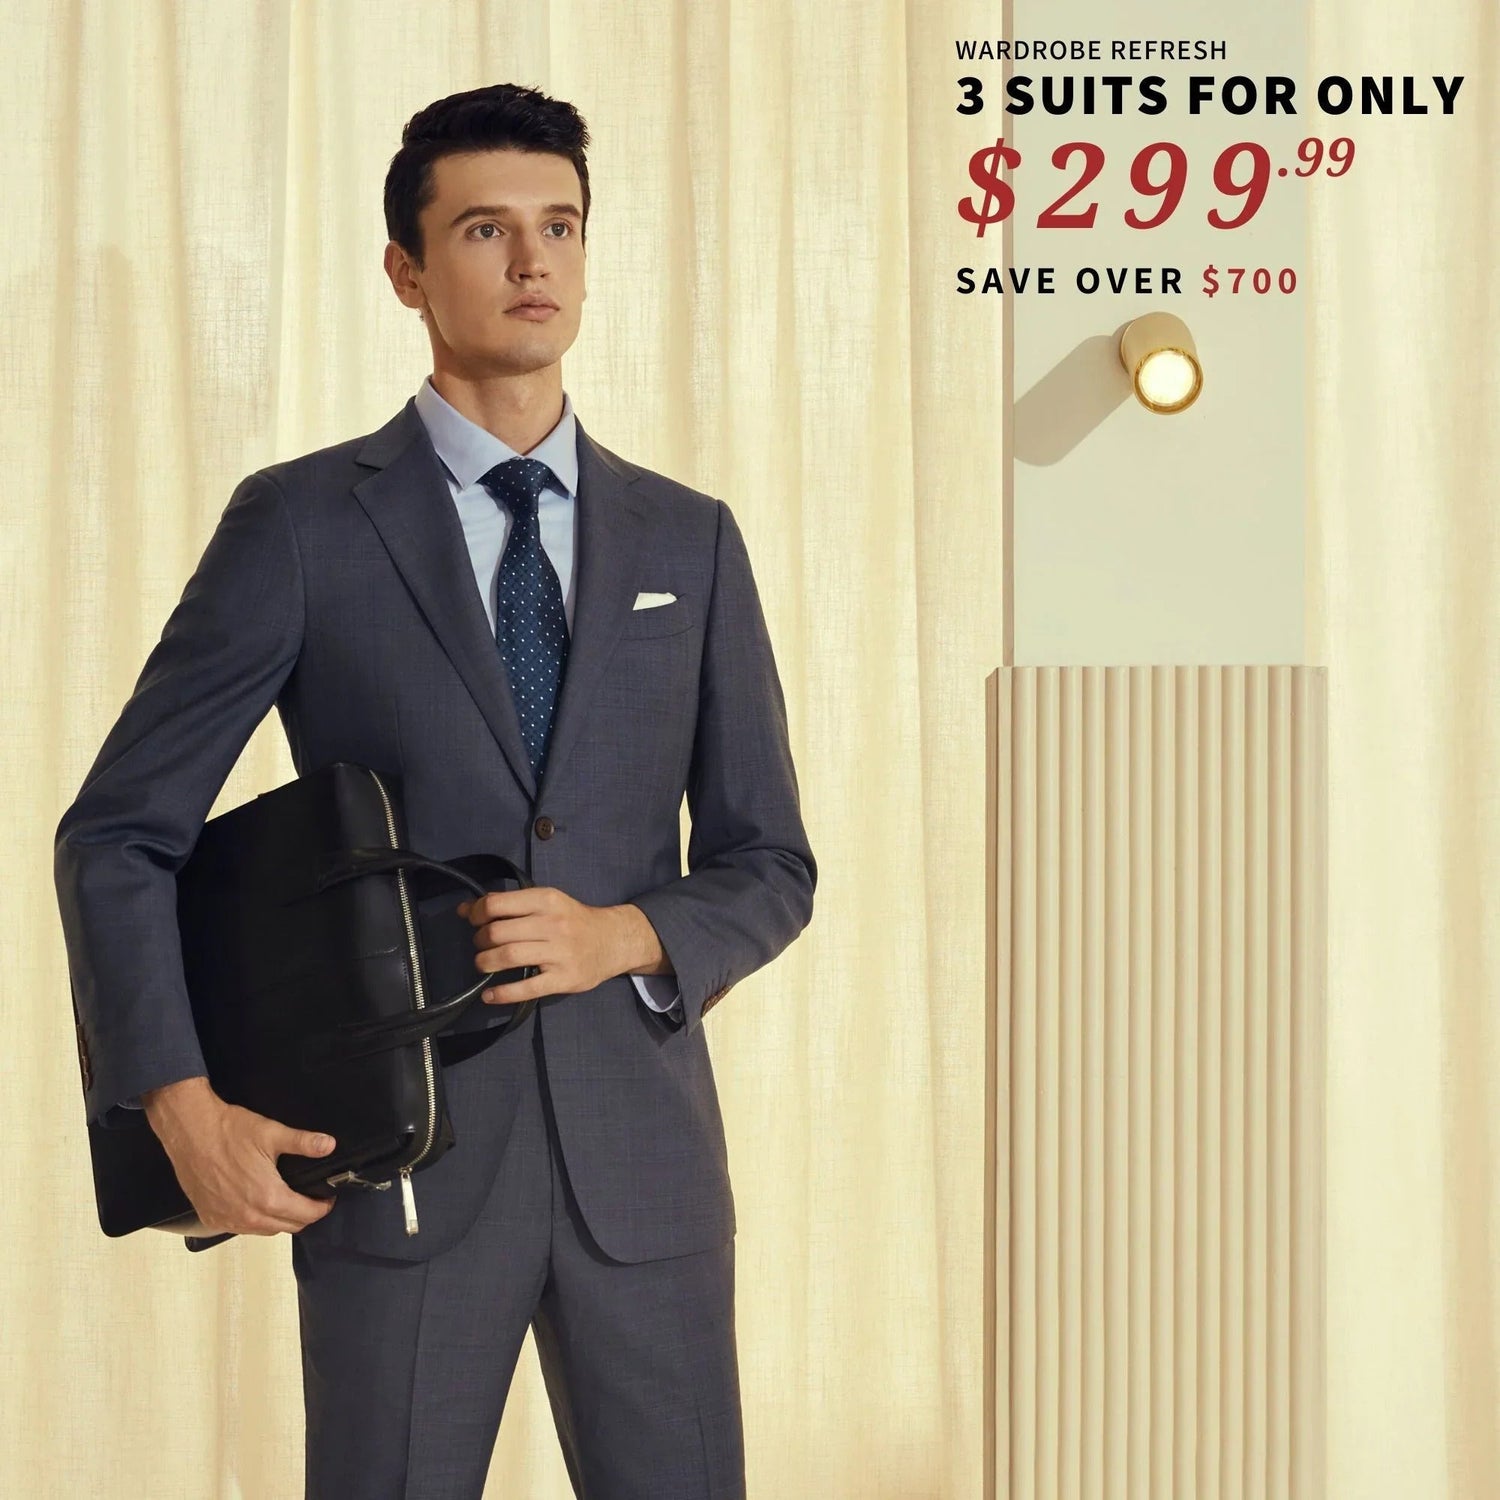 A man in a BYOB suit is holding a briefcase while wearing pants.